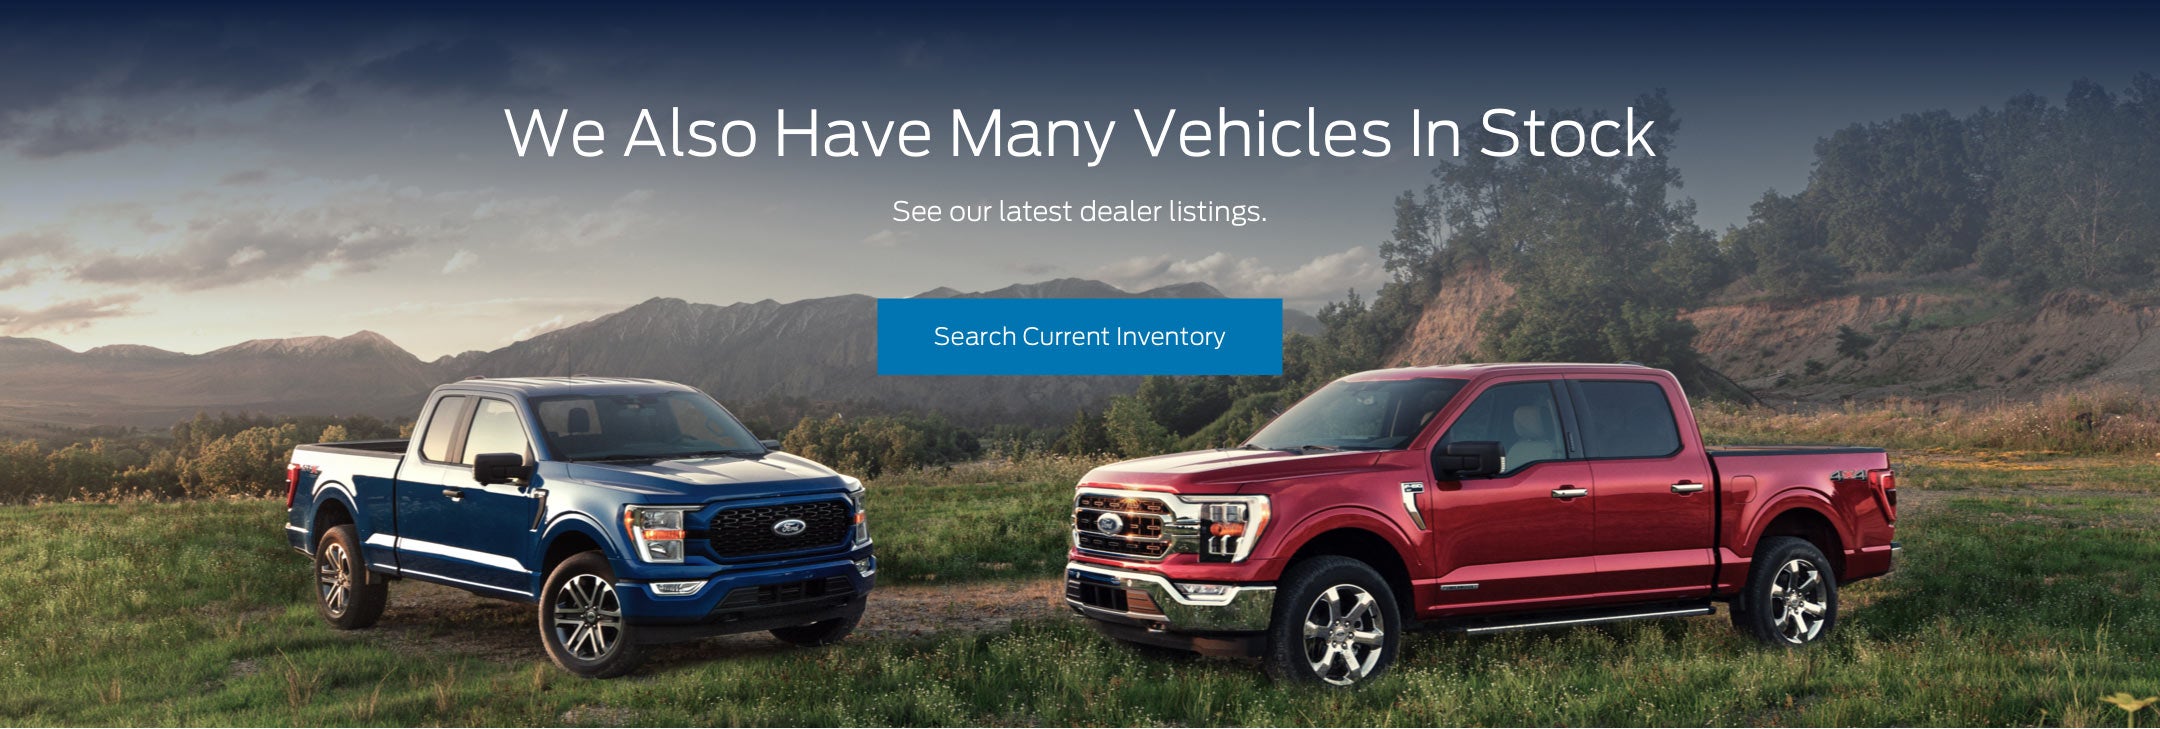 Ford vehicles in stock | Fremont Ford Sheridan in Sheridan WY